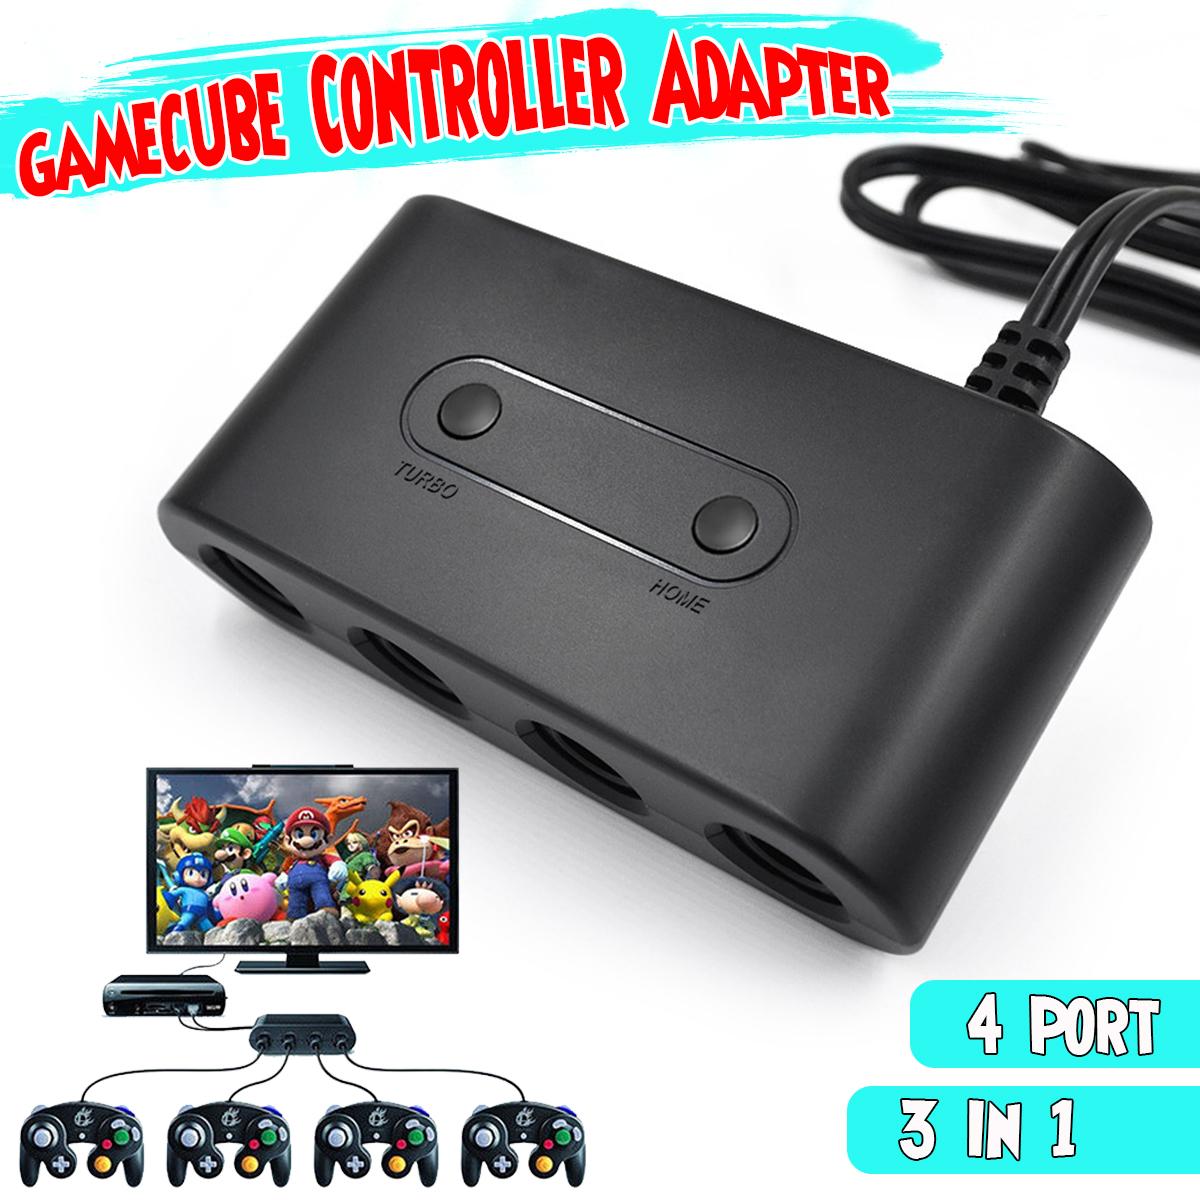 4 Port Gamecube Ngc Gc Controller Adapter For Nintendo Wii U Switch Pc Usb 3 In1 Buy Online At Best Prices In Pakistan Daraz Pk